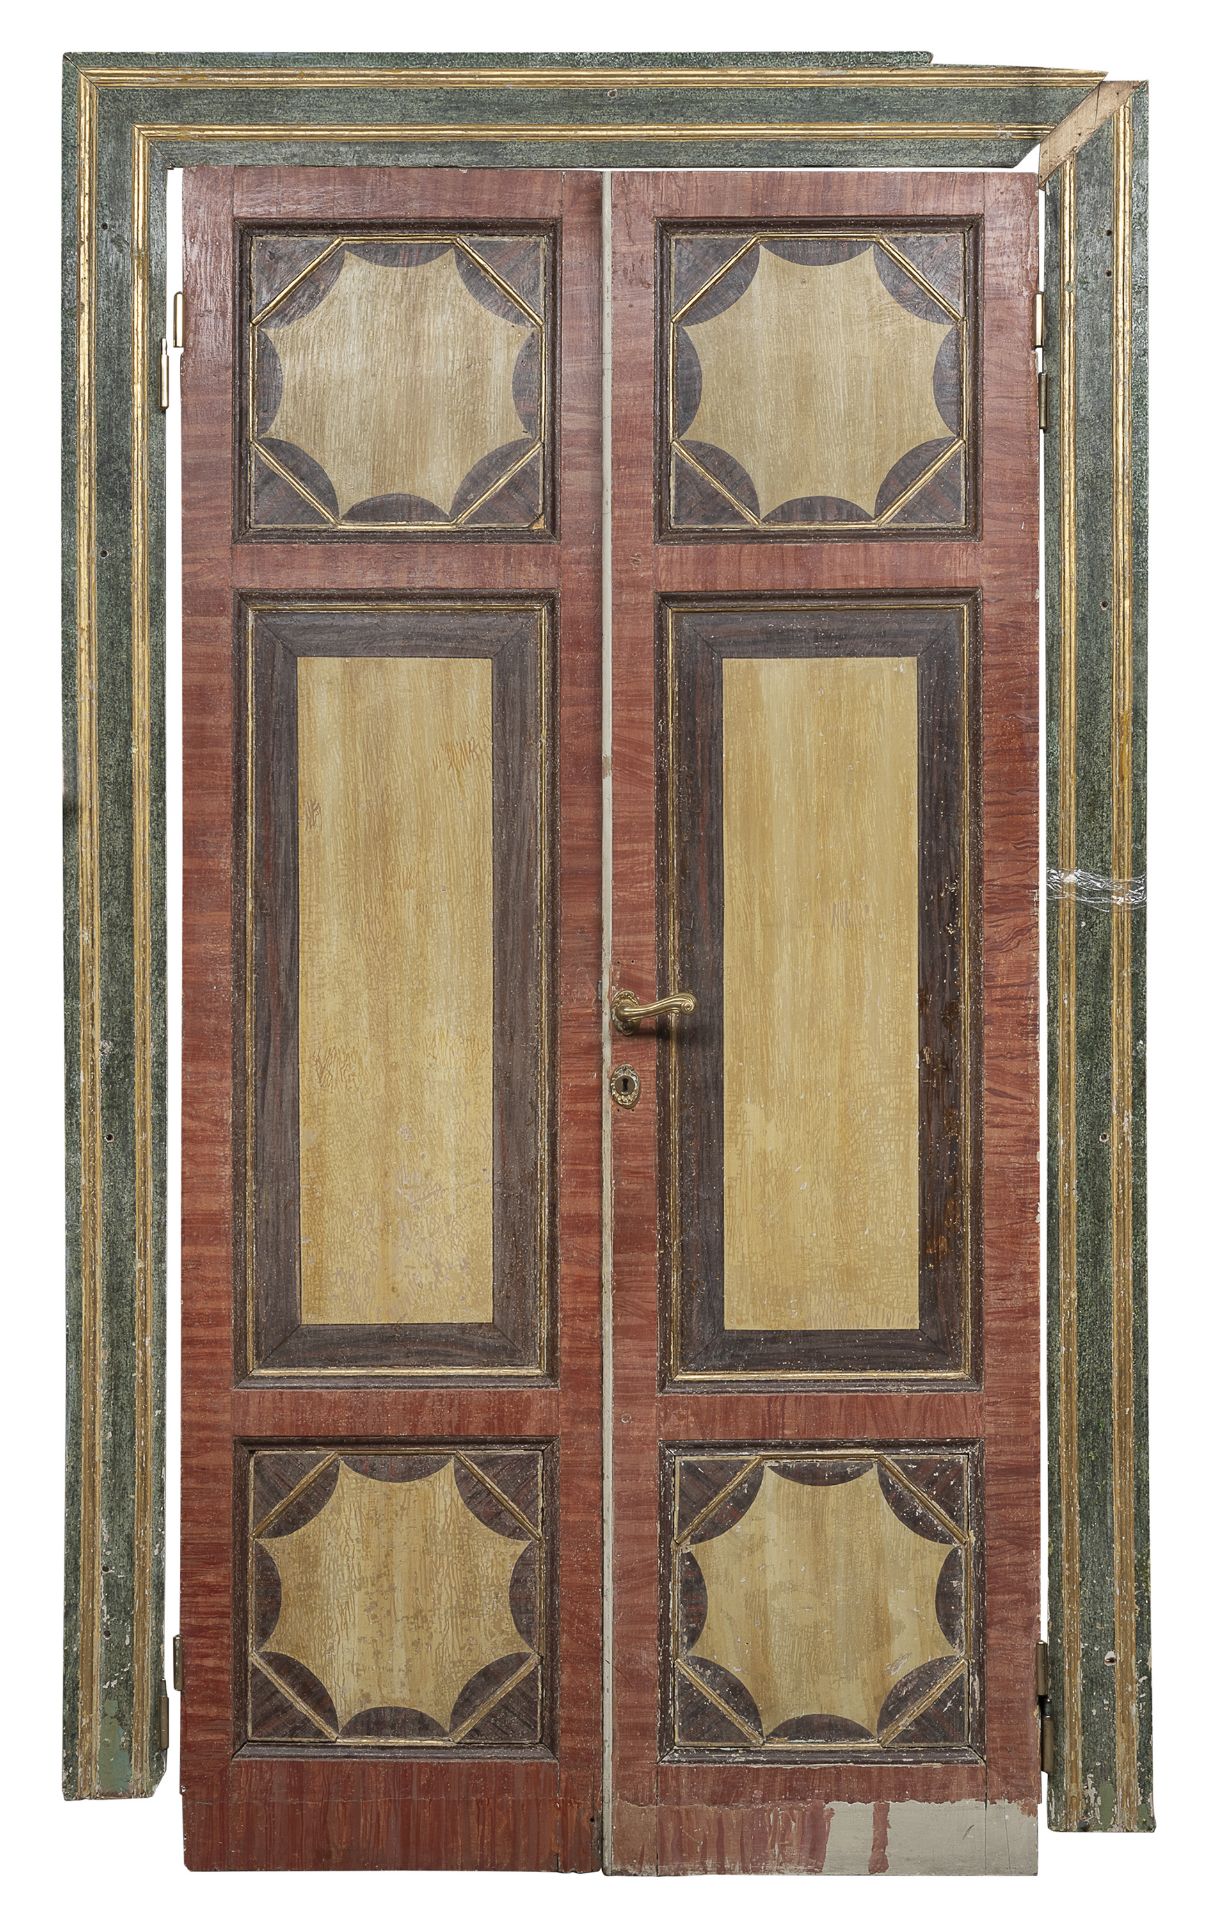 DOUBLE DOOR IN LACQUERED WOOD CENTRAL ITALY 18TH CENTURY